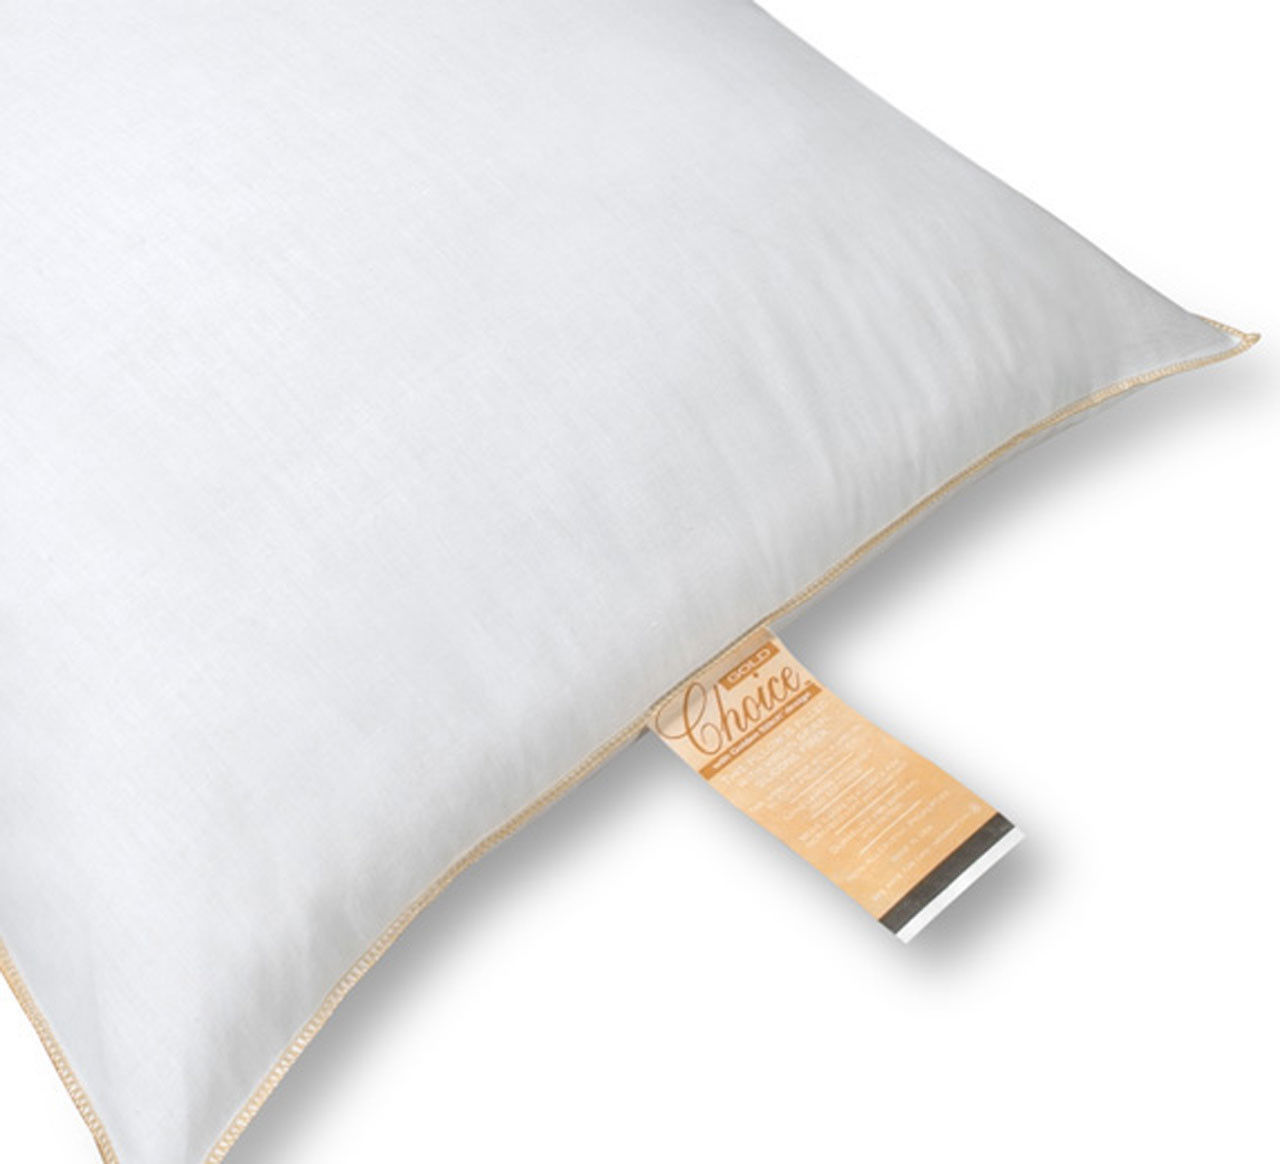 What keeps Super Gold Choice Pillows plump for such a long period?